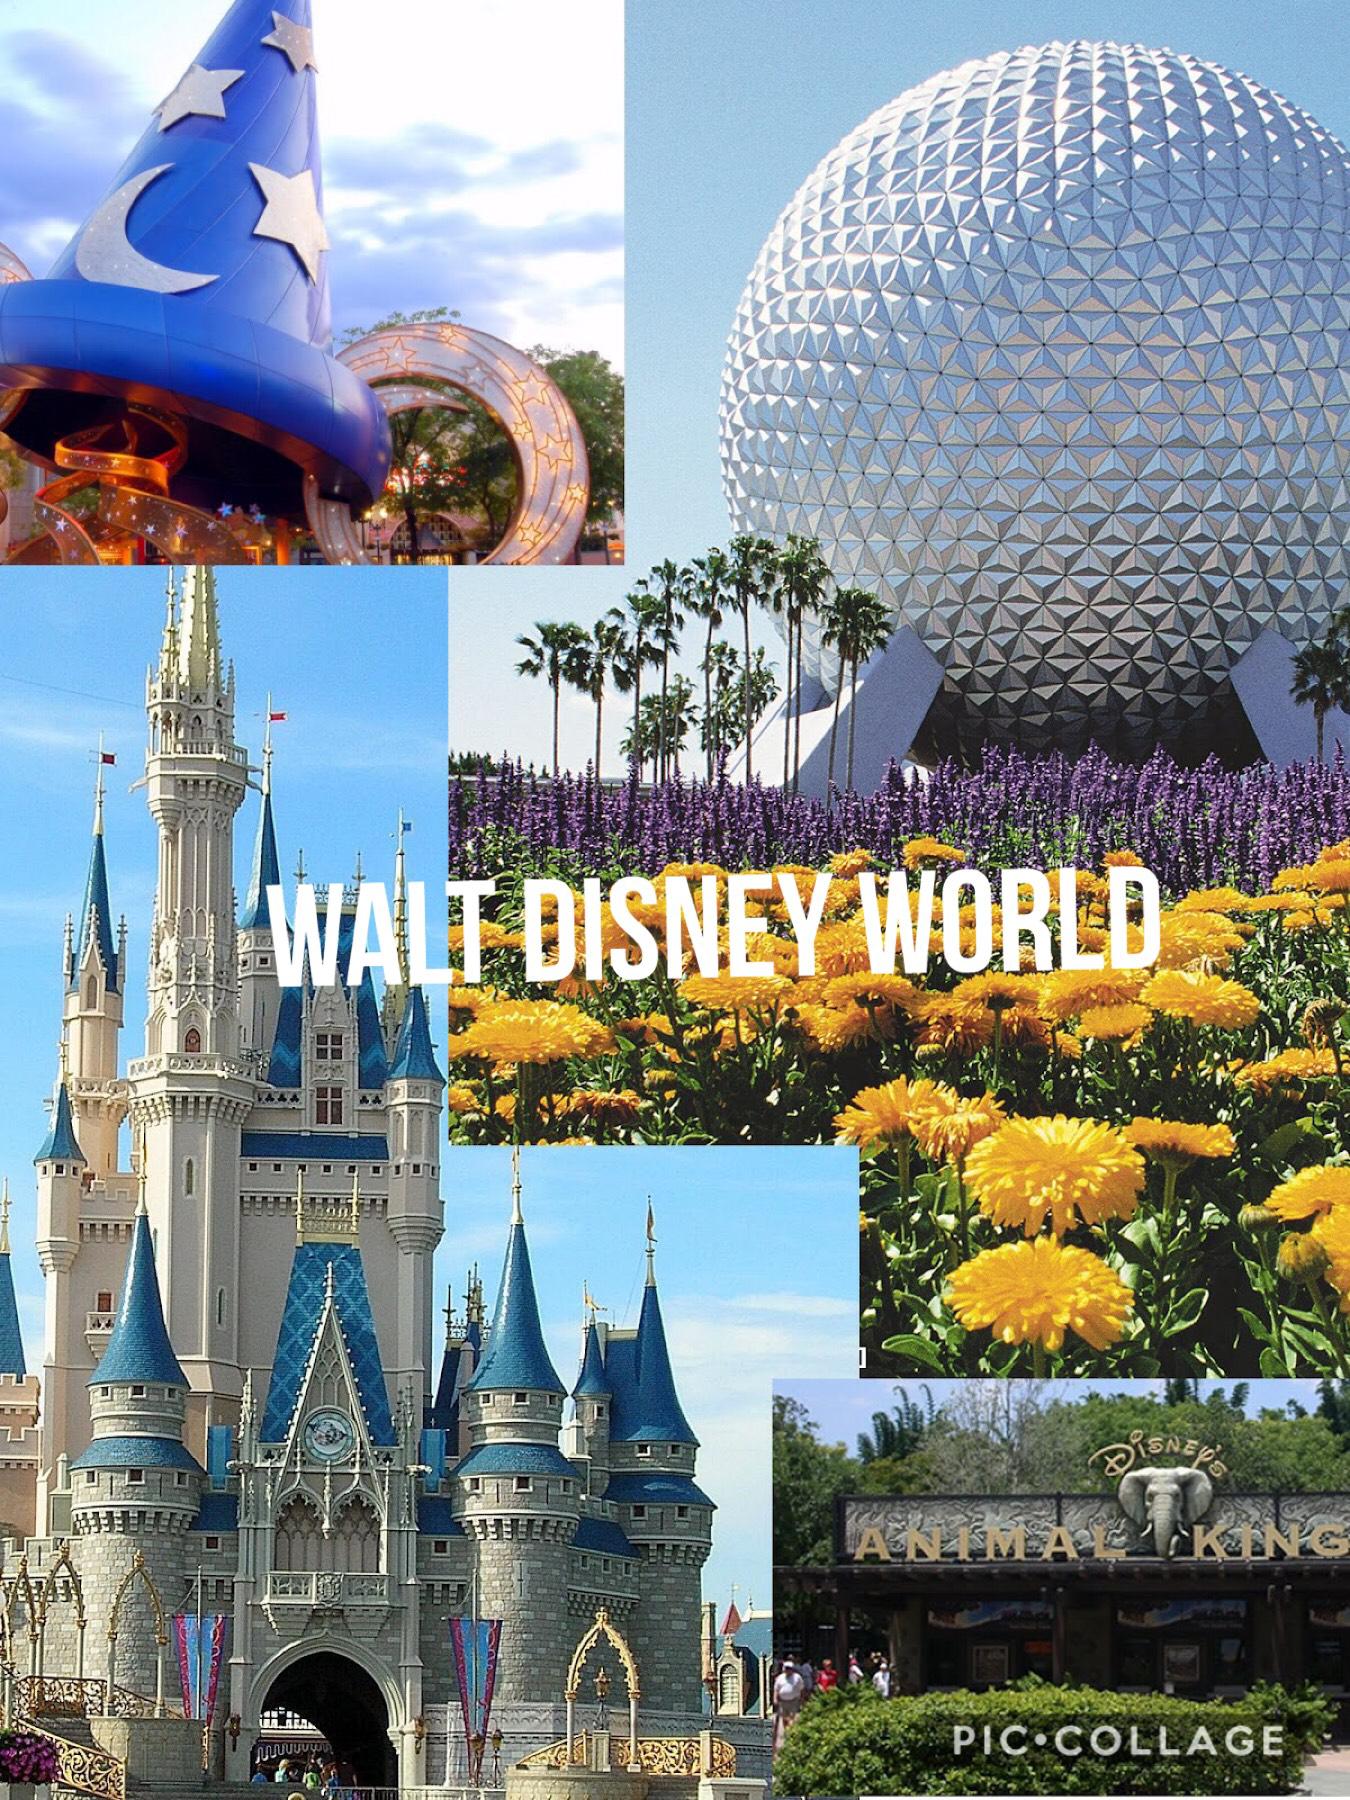 Hello welcome to my page hope you like it!
#disneyworld #piccollage